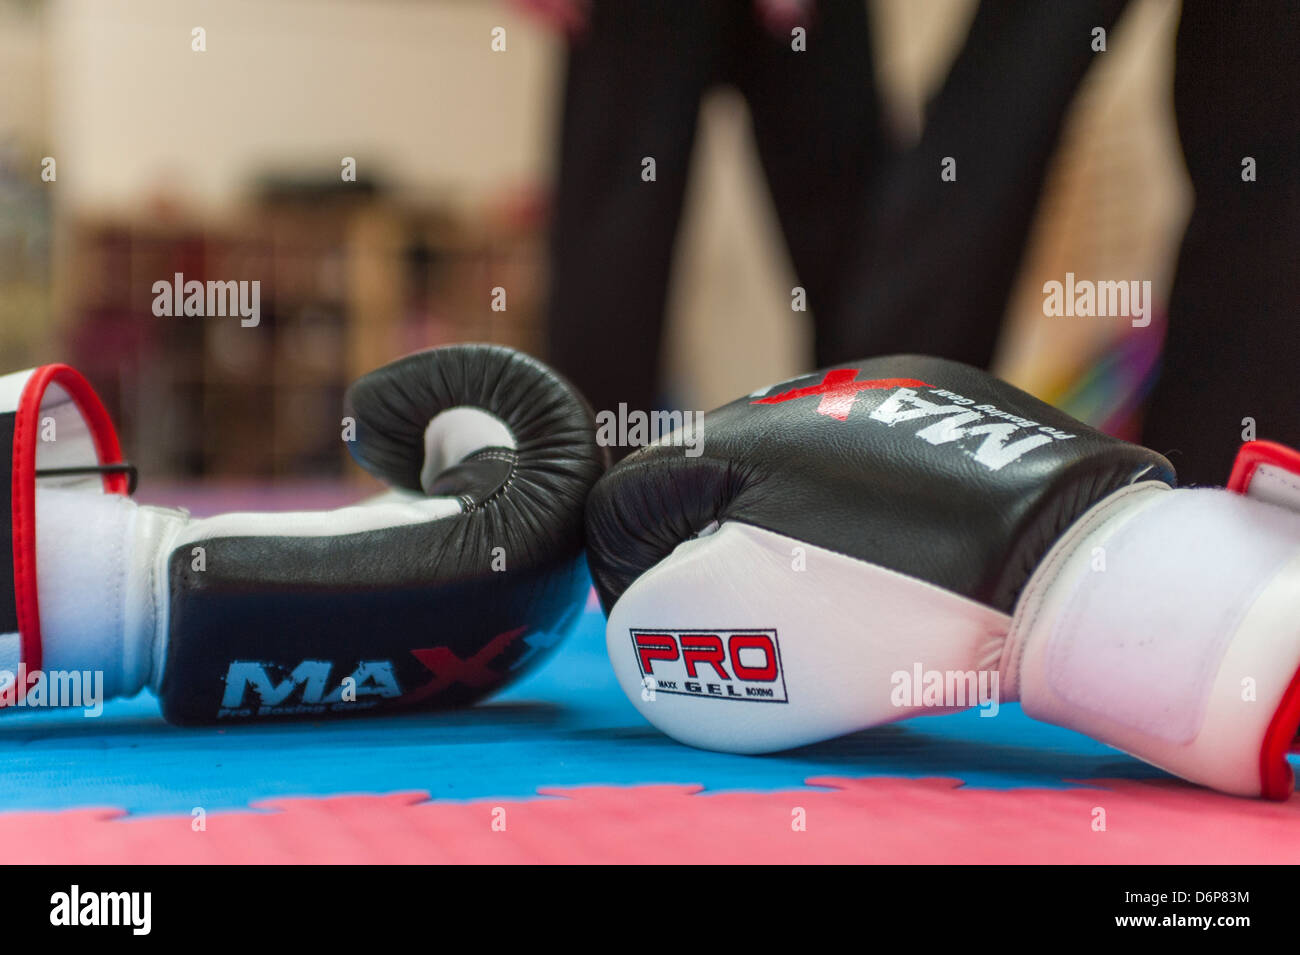 SPARRING GLOVES USED  AT THE KUK SOOL MARTIAL ARTS SCHOOL IN GLASGOW Stock Photo